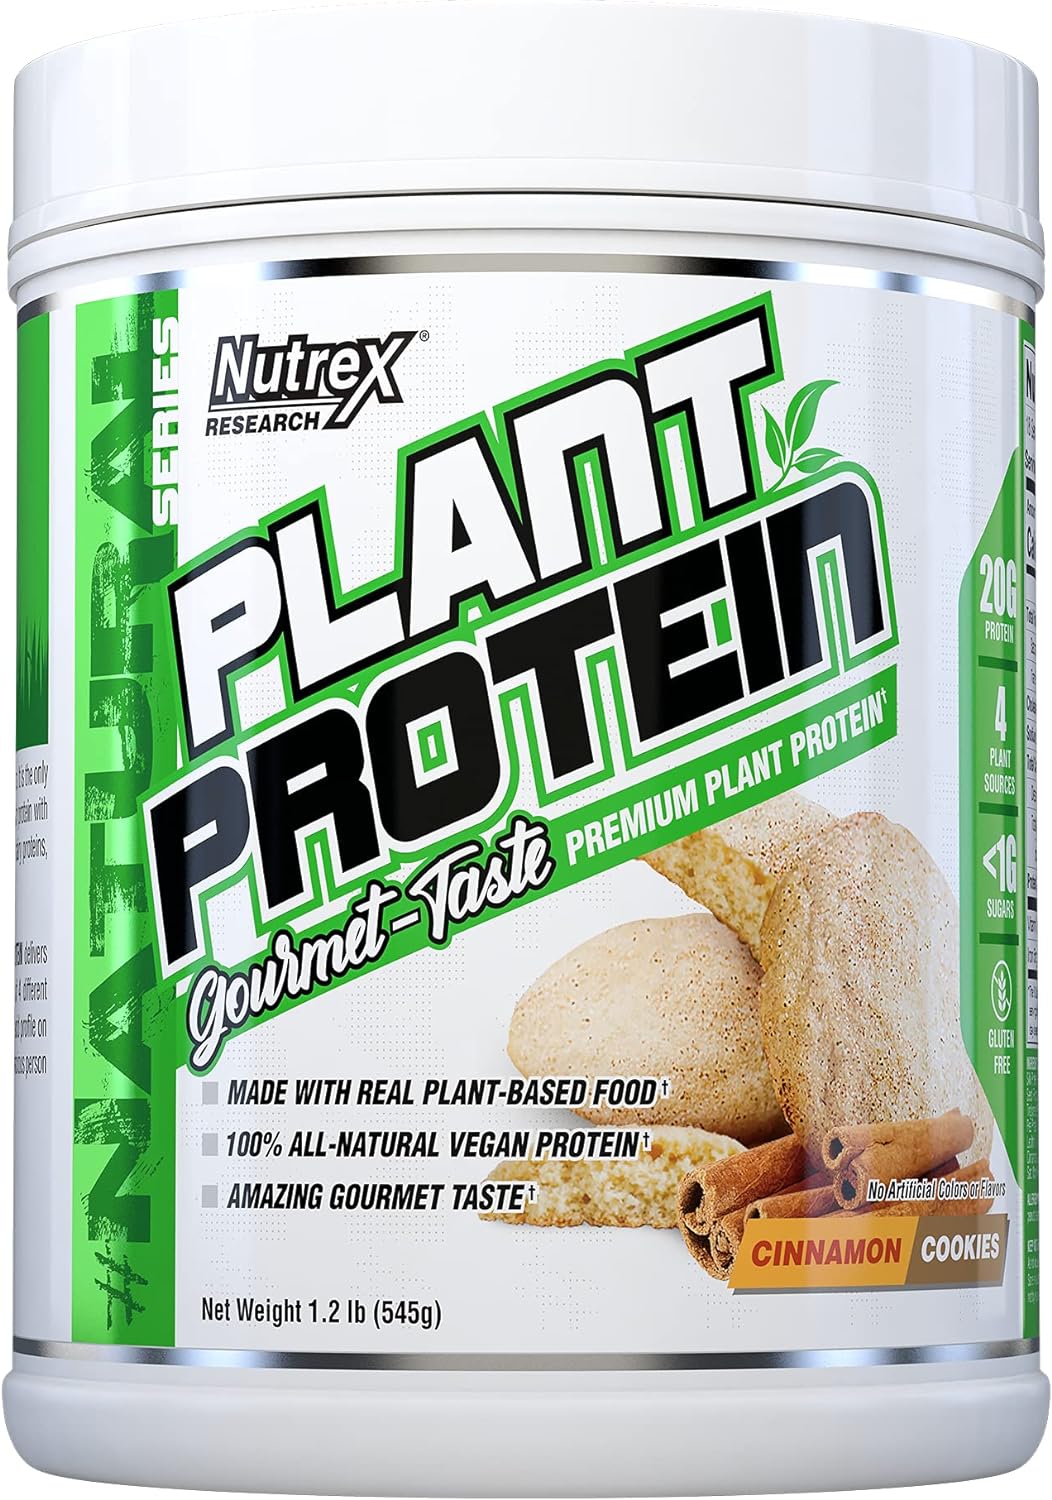 Nutrex Research Plant Protein | Great Tasting Vegan Plant Based Protei